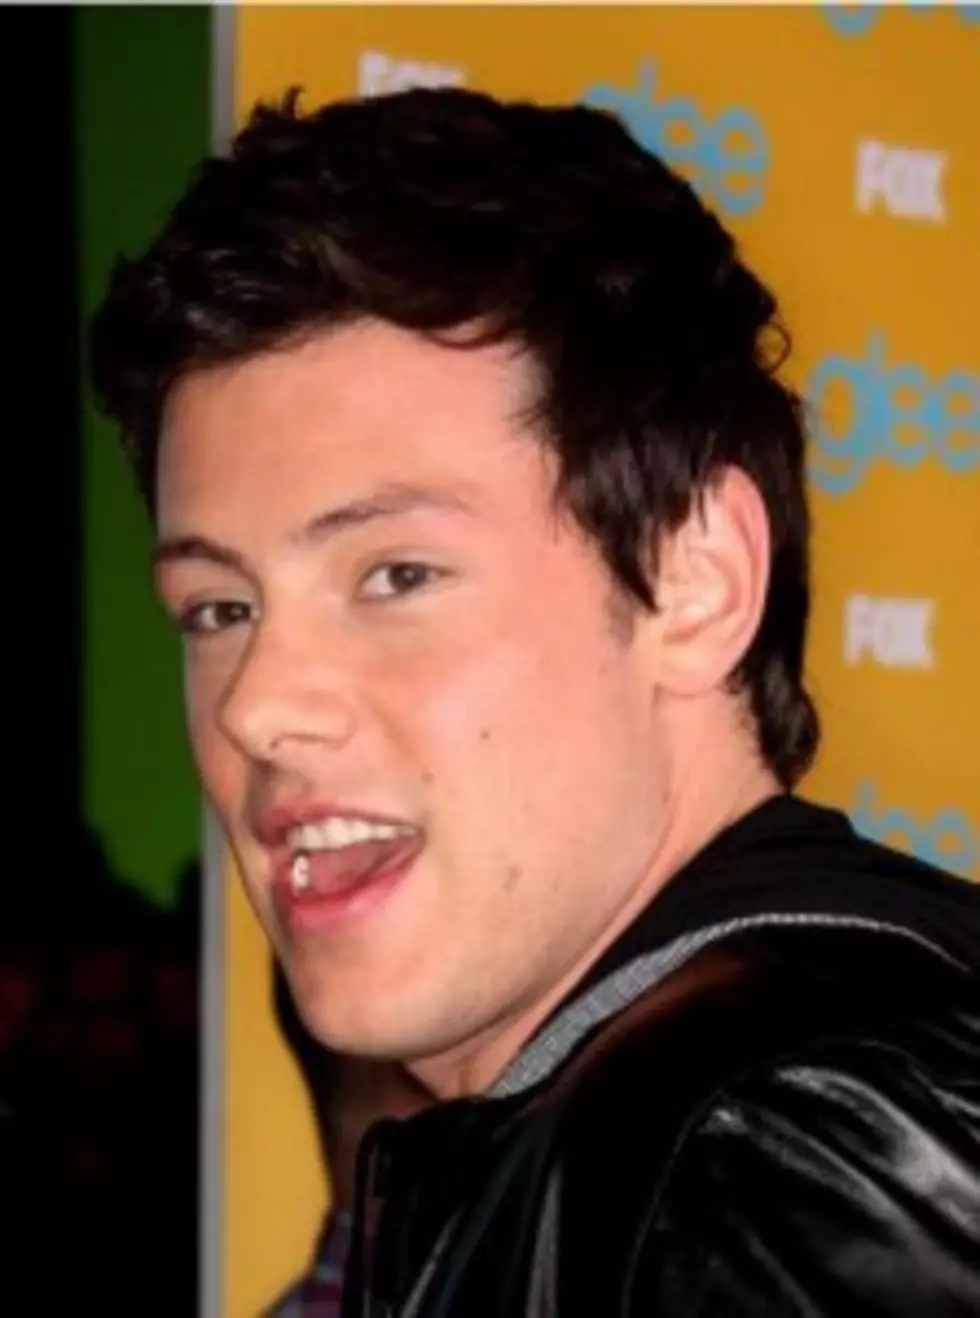 Corey Monteith From Glee Talks About His High School Days Not Being The Same As His Character